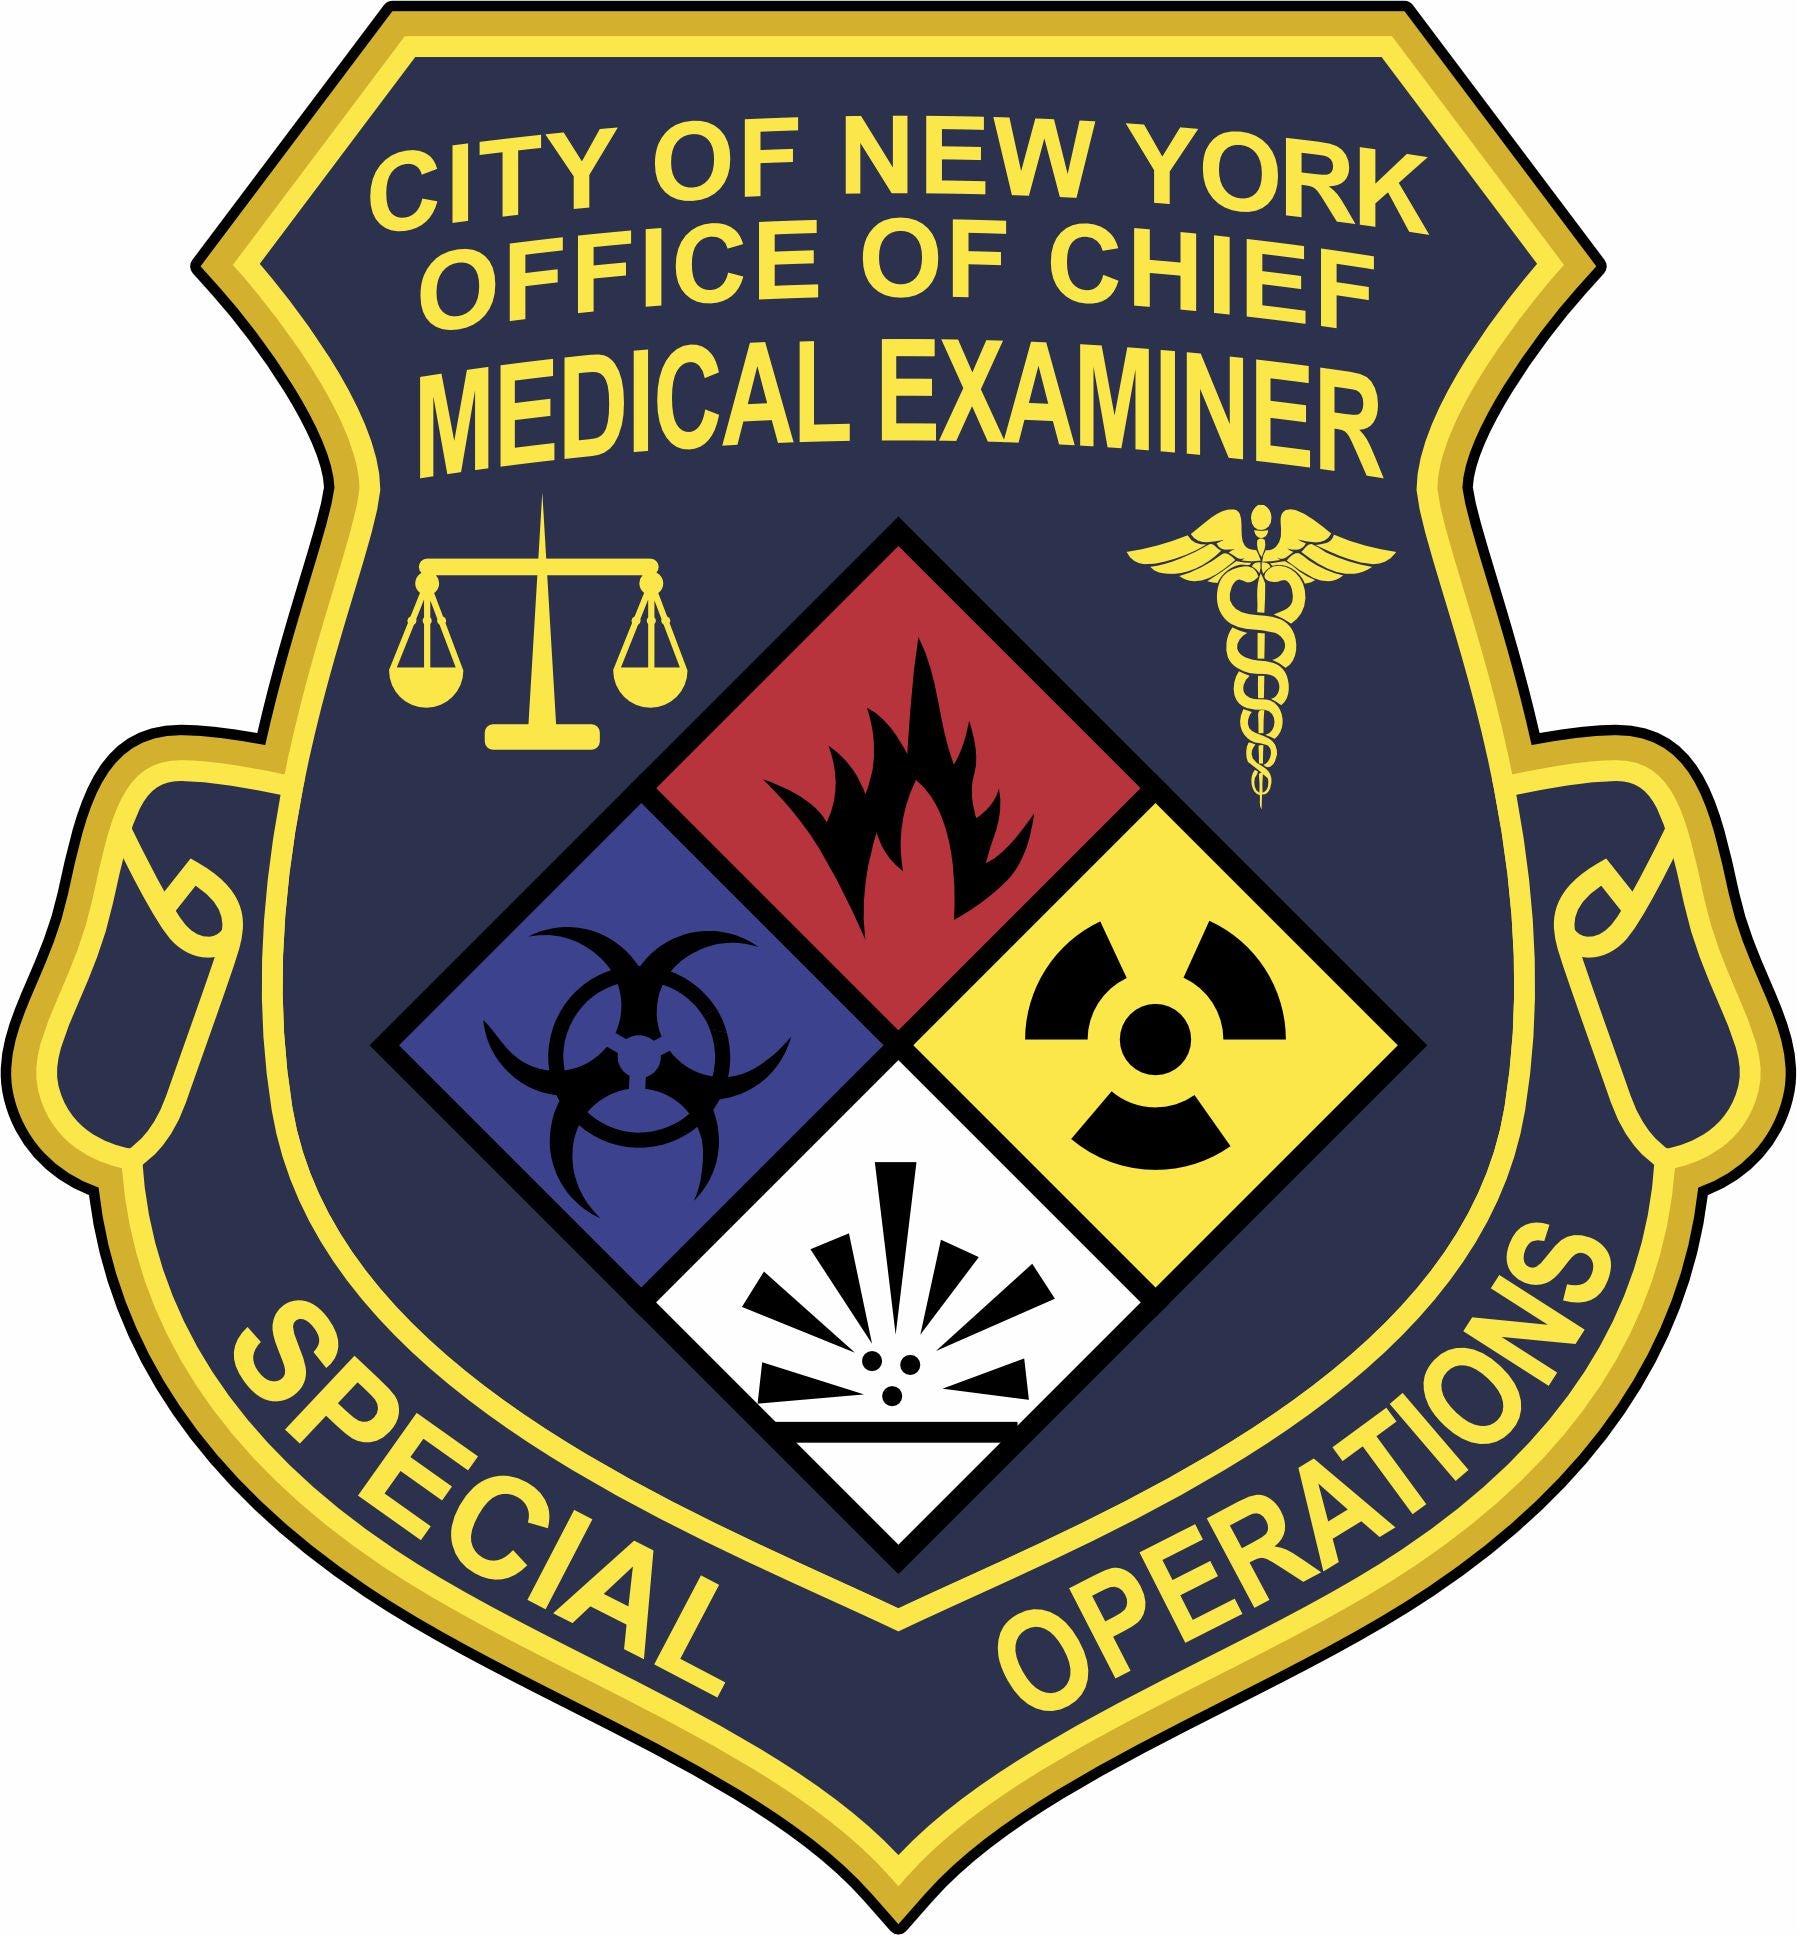 New York Office of Chief Medical Examiner Customer Decal - Powercall Sirens LLC